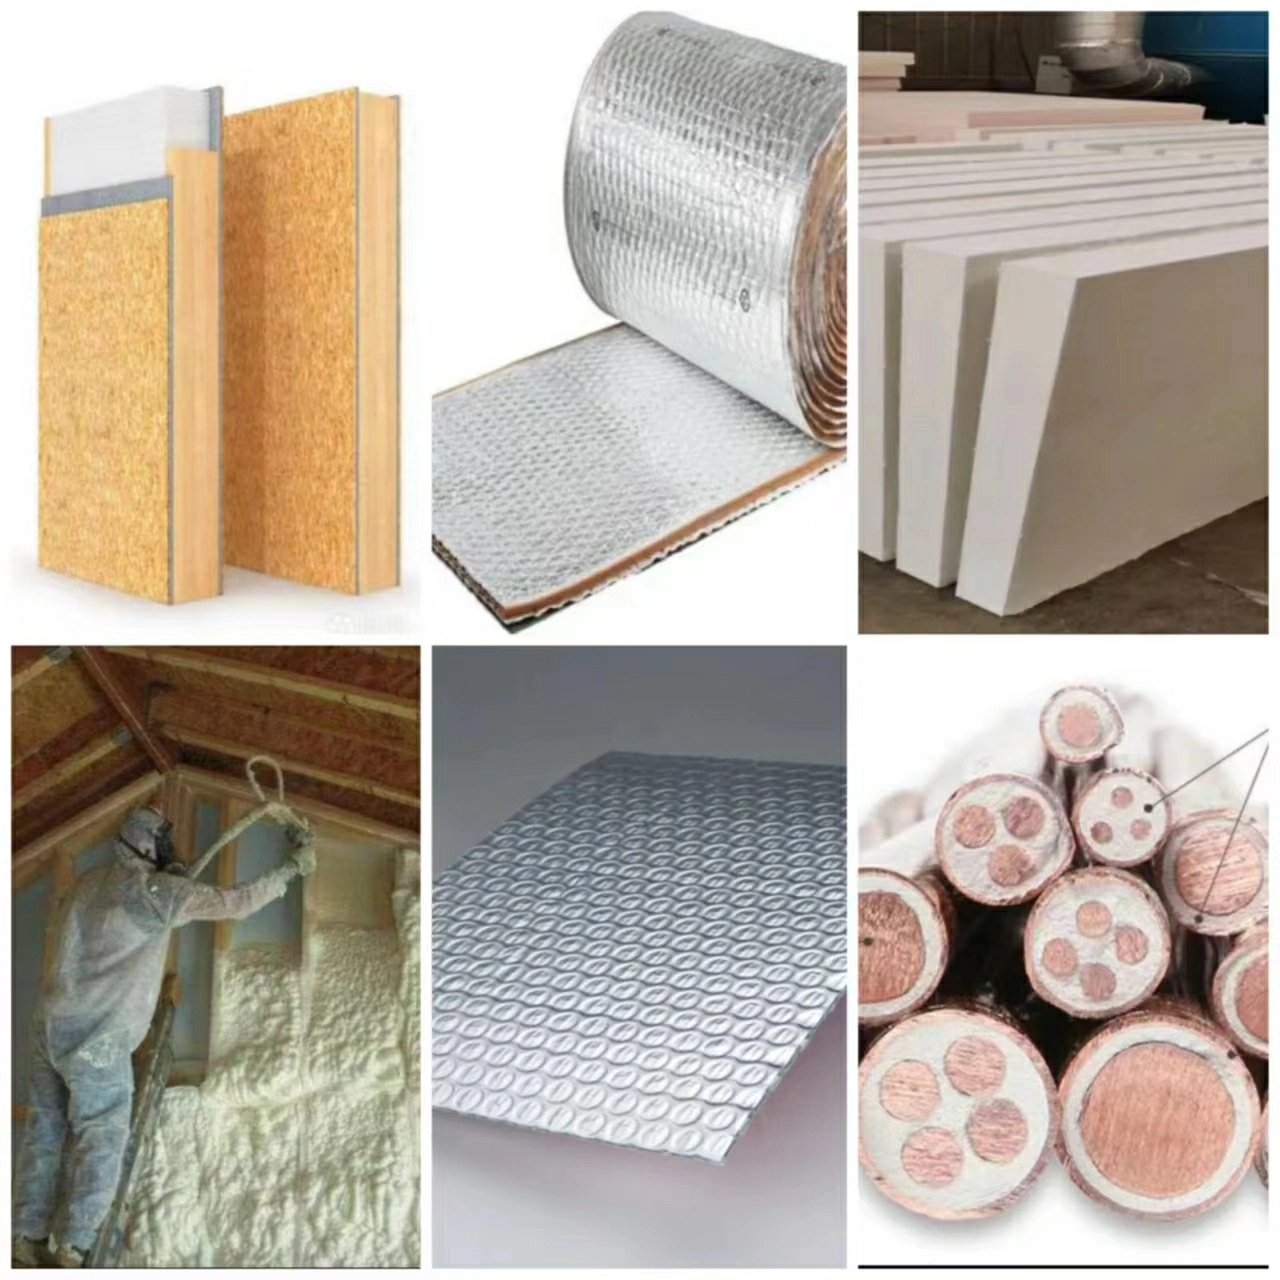 Types of Insulation and Their Applications